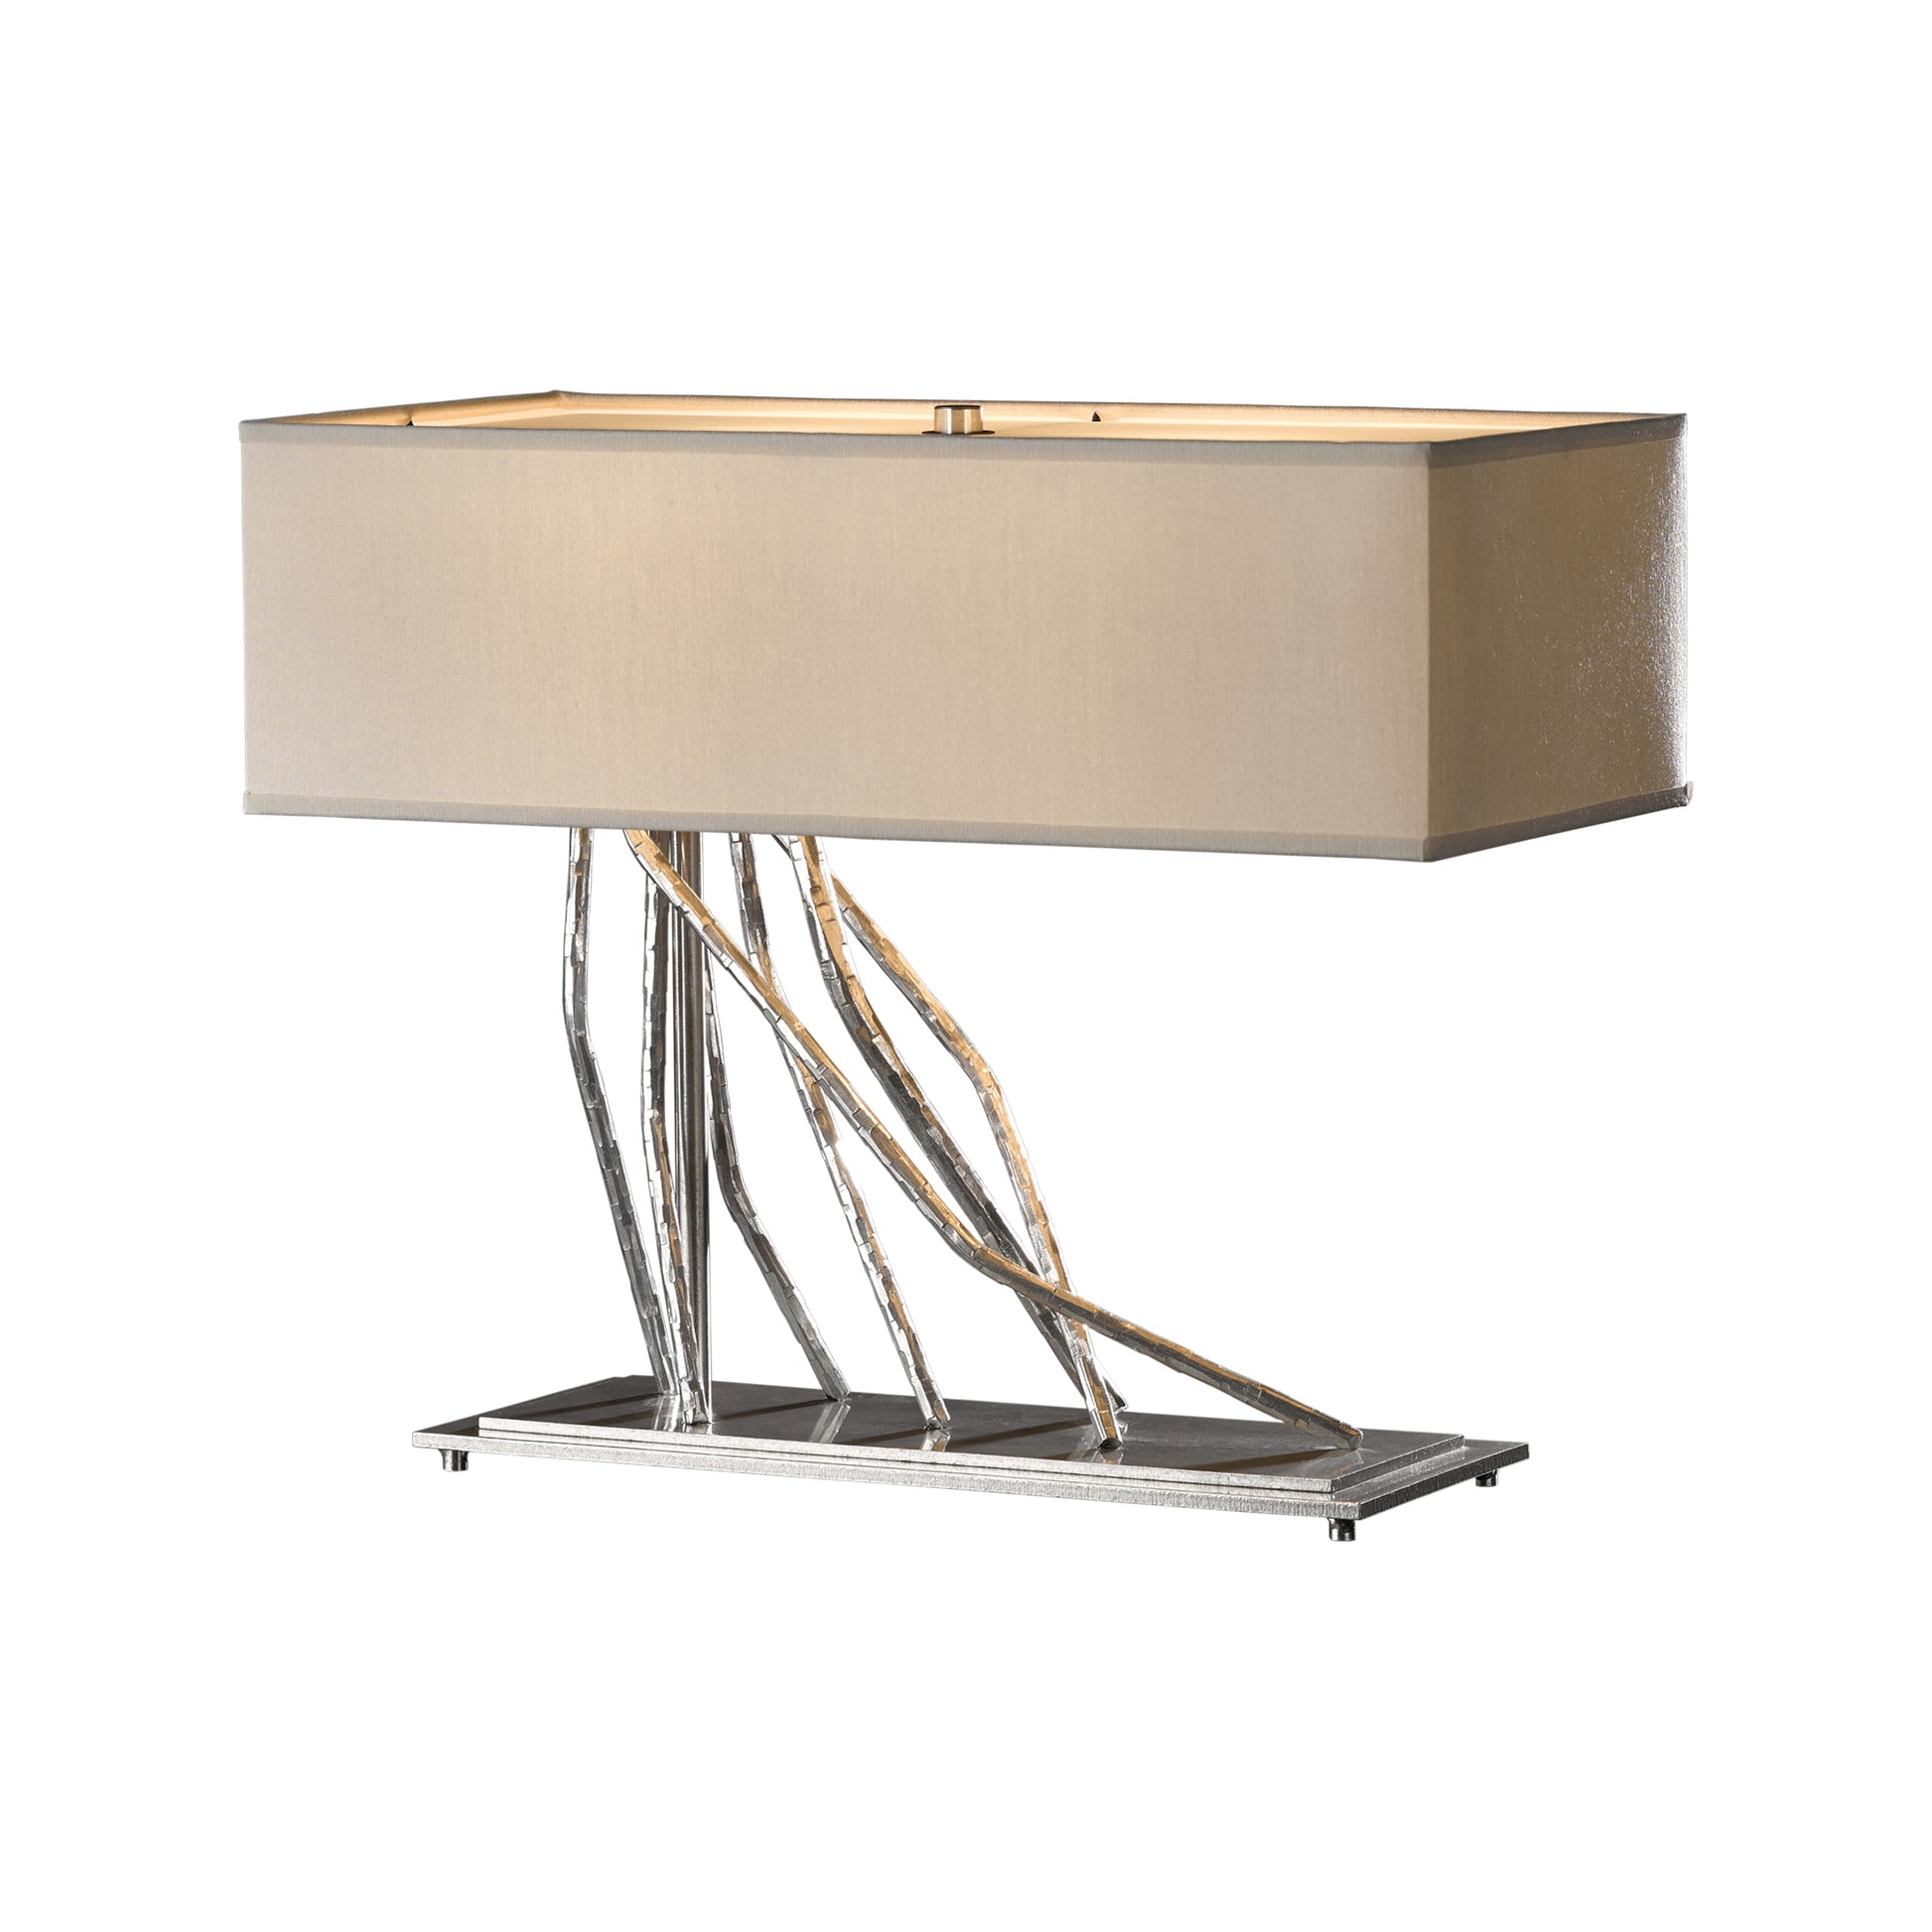 A modern Brindille Table Lamp by Hubbardton Forge, featuring a rectangular beige shade on top of a chrome base with elegantly twisted iron rods supporting it.